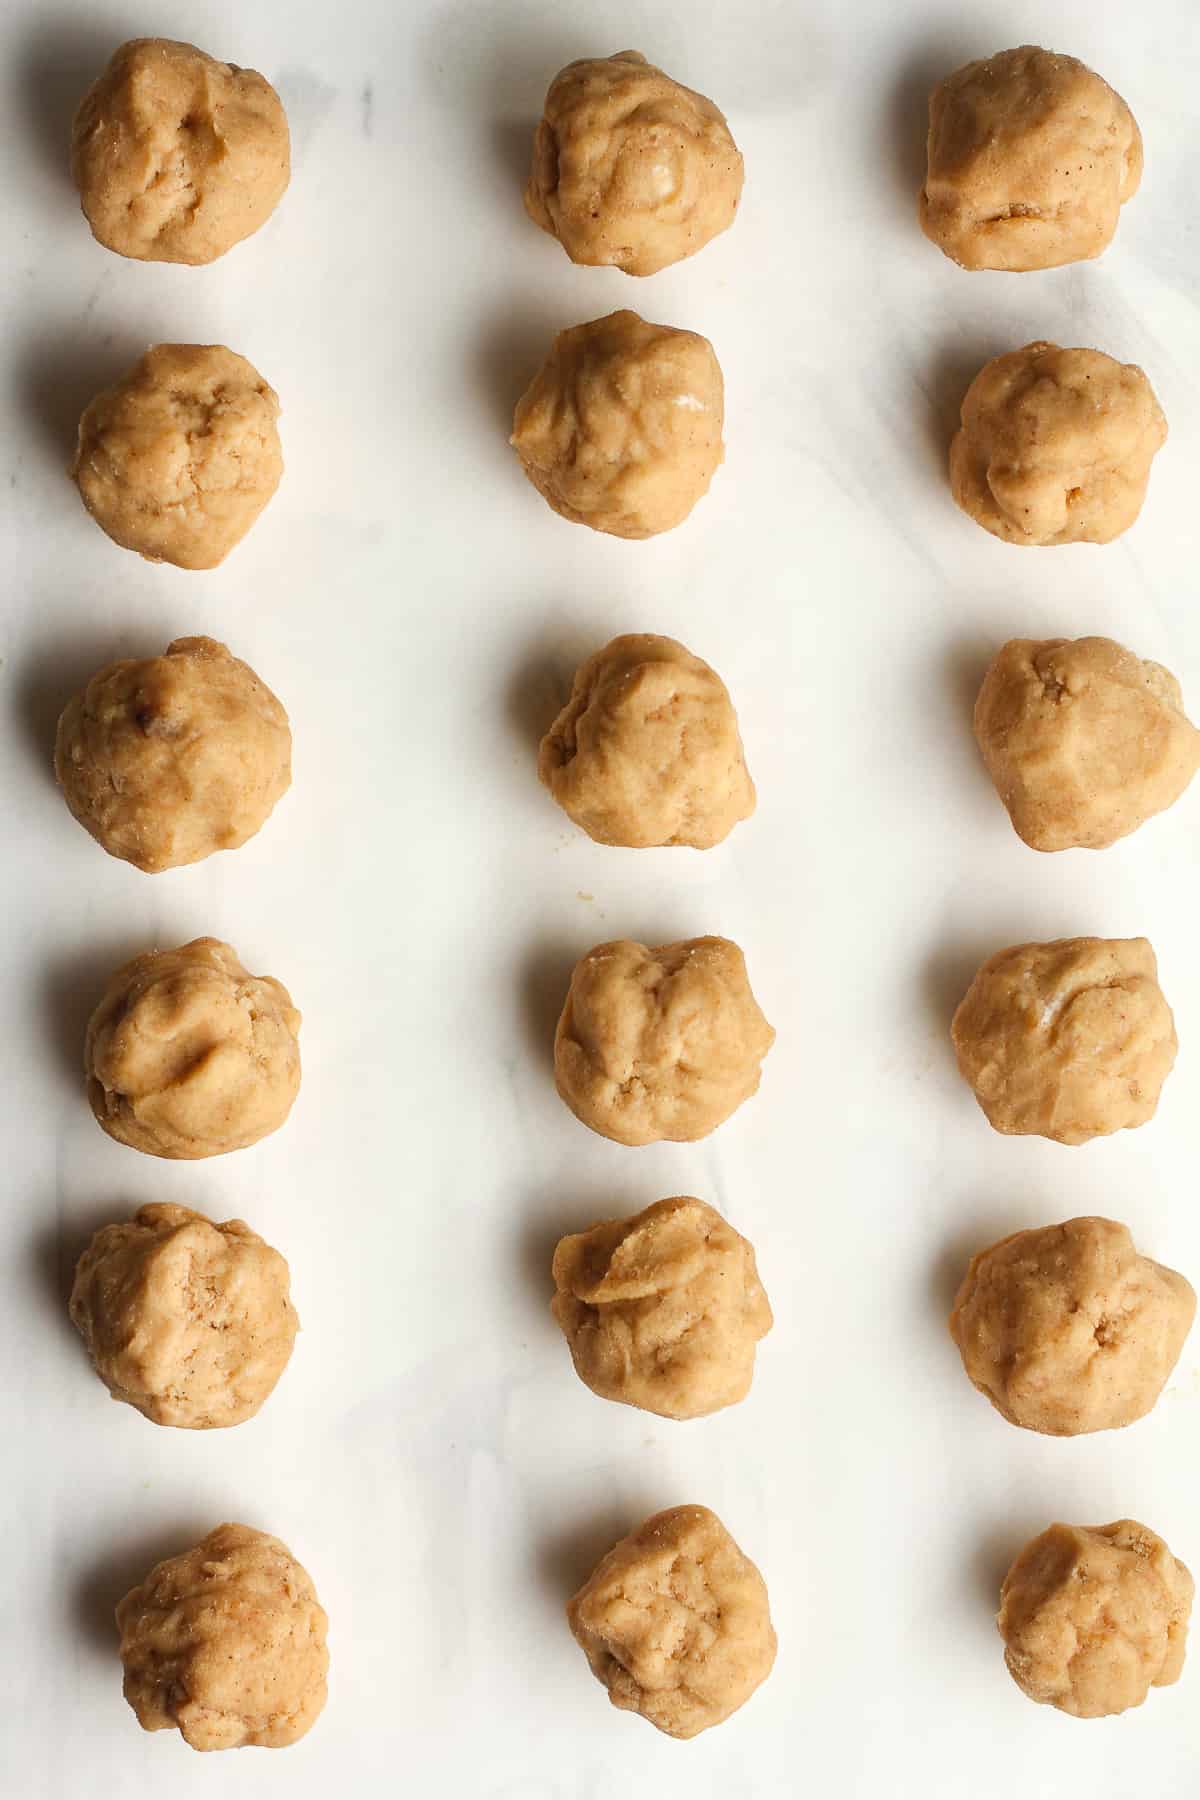 18 cookie balls on a white background.